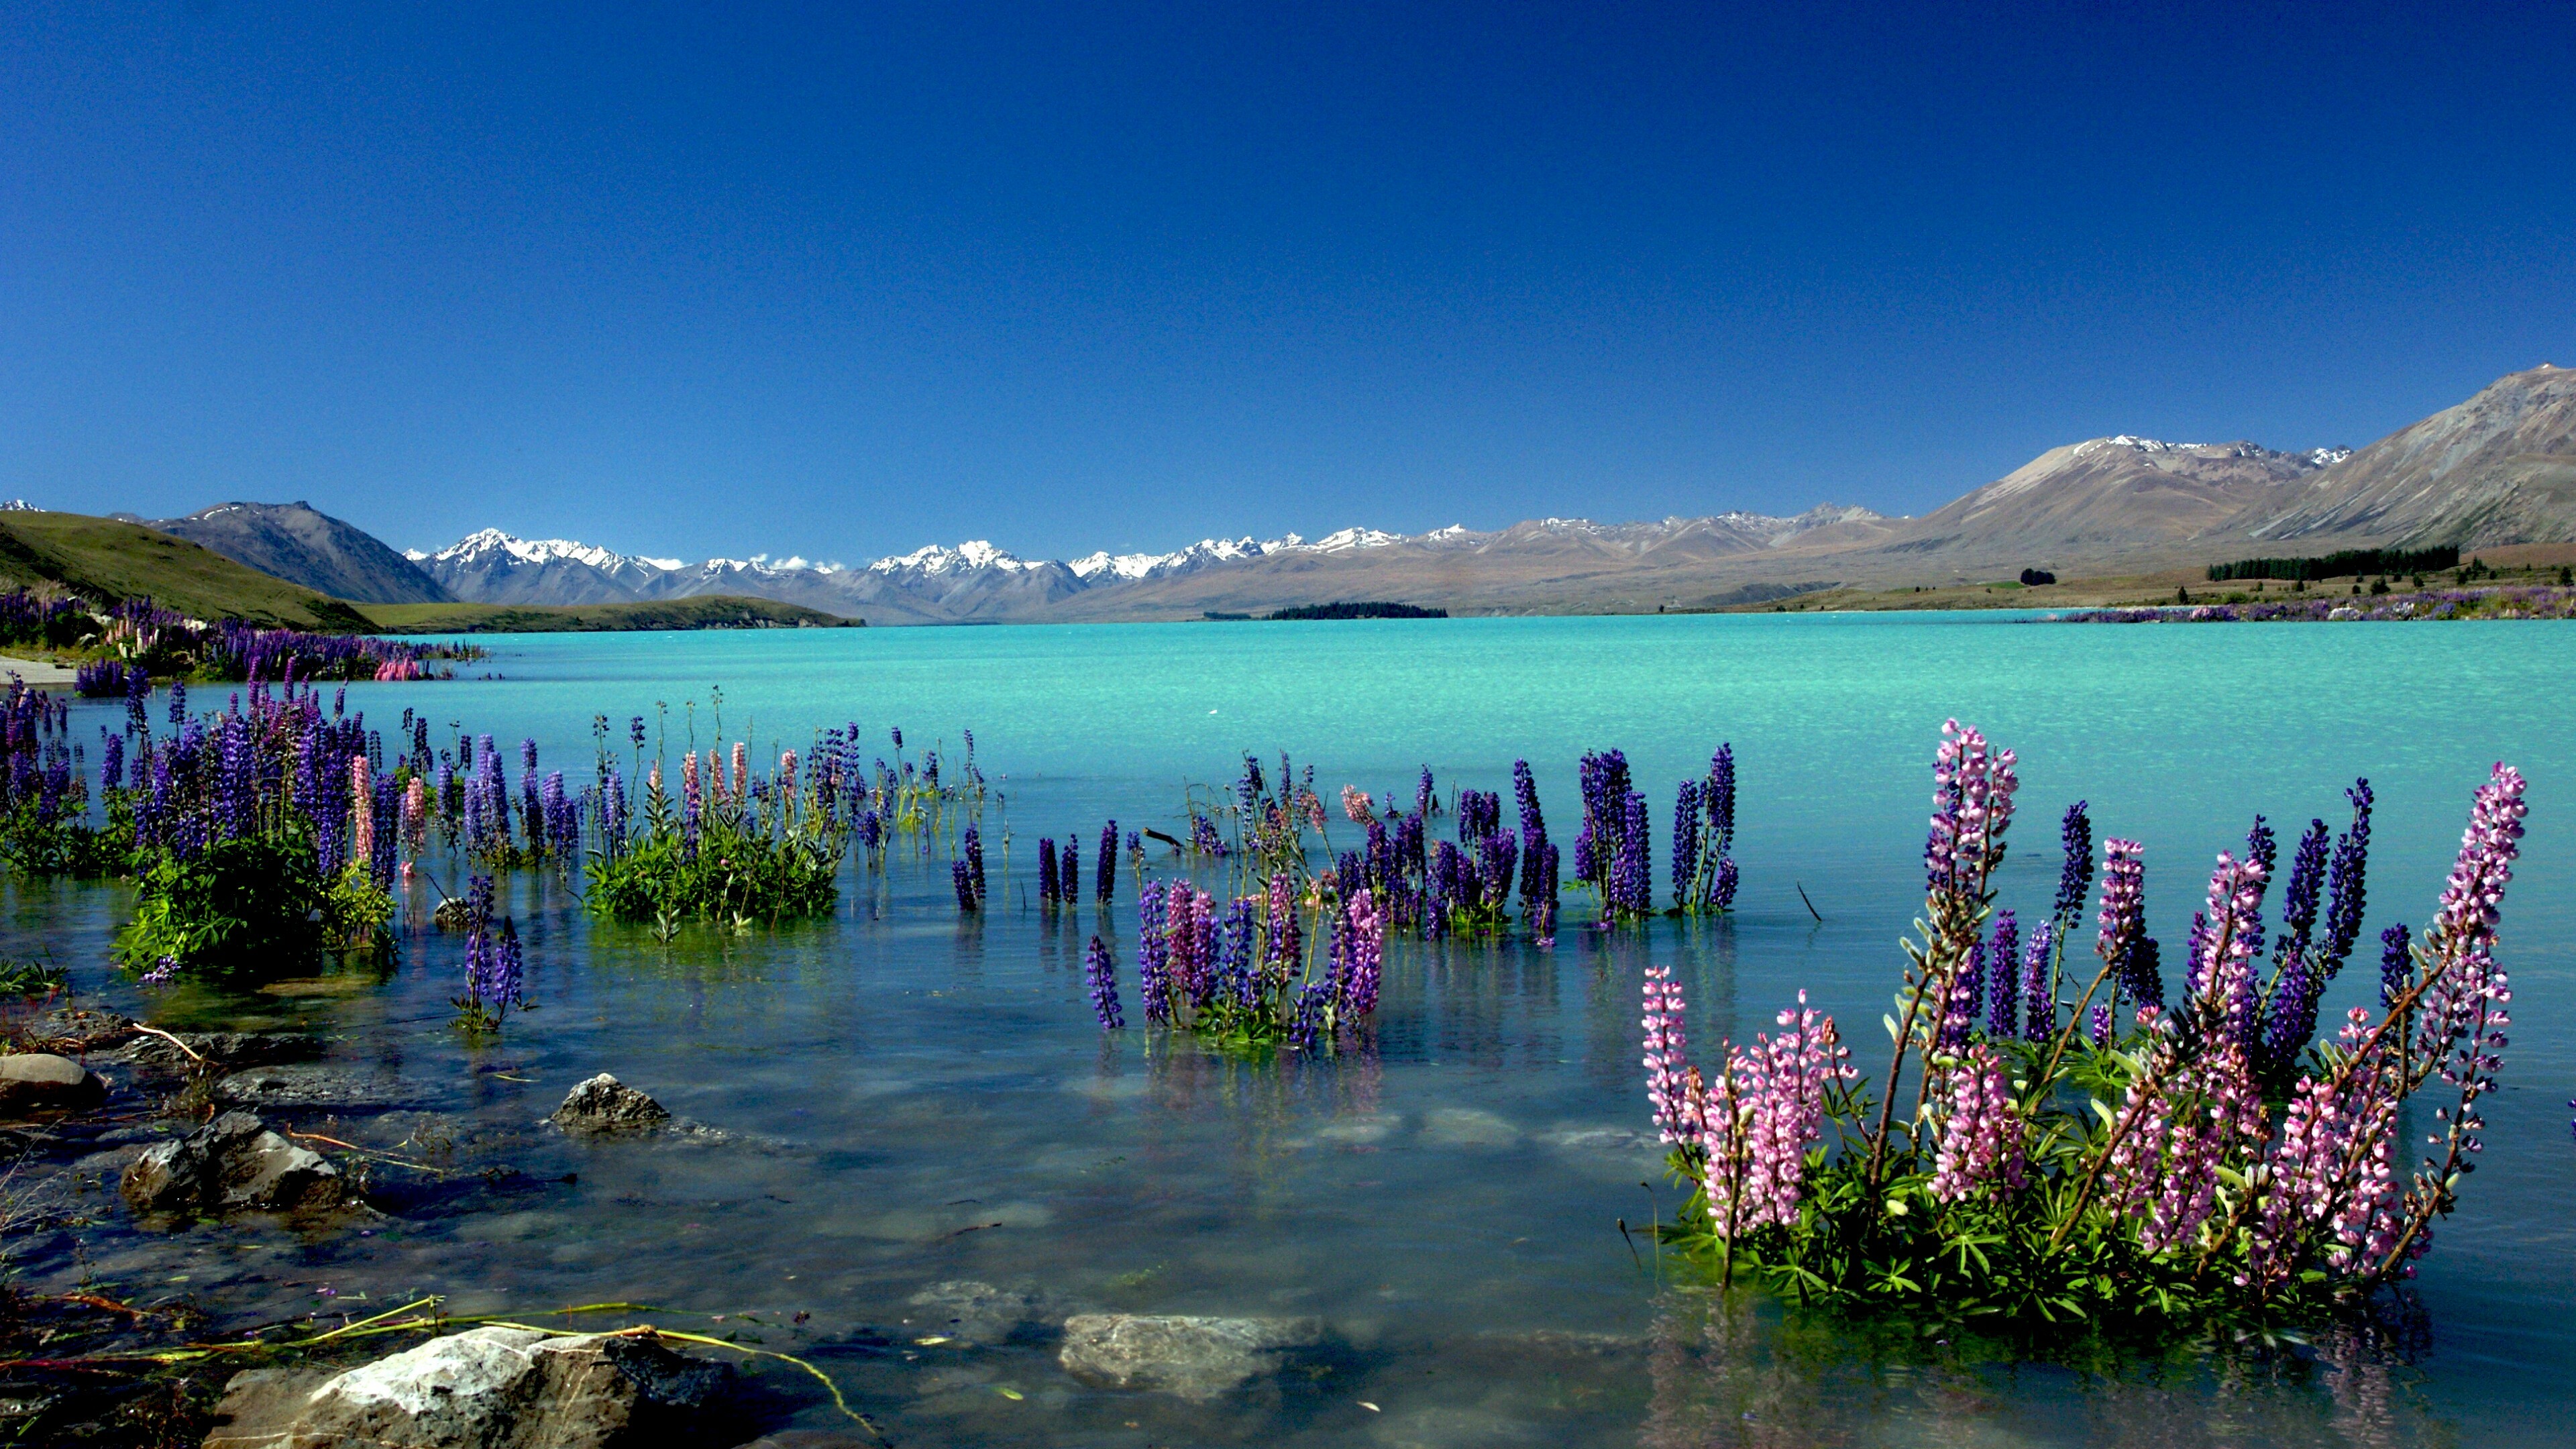 New Zealand: Lake Tekapo, Nature, The indigenous Maori are the largest minority in the country. 3840x2160 4K Wallpaper.